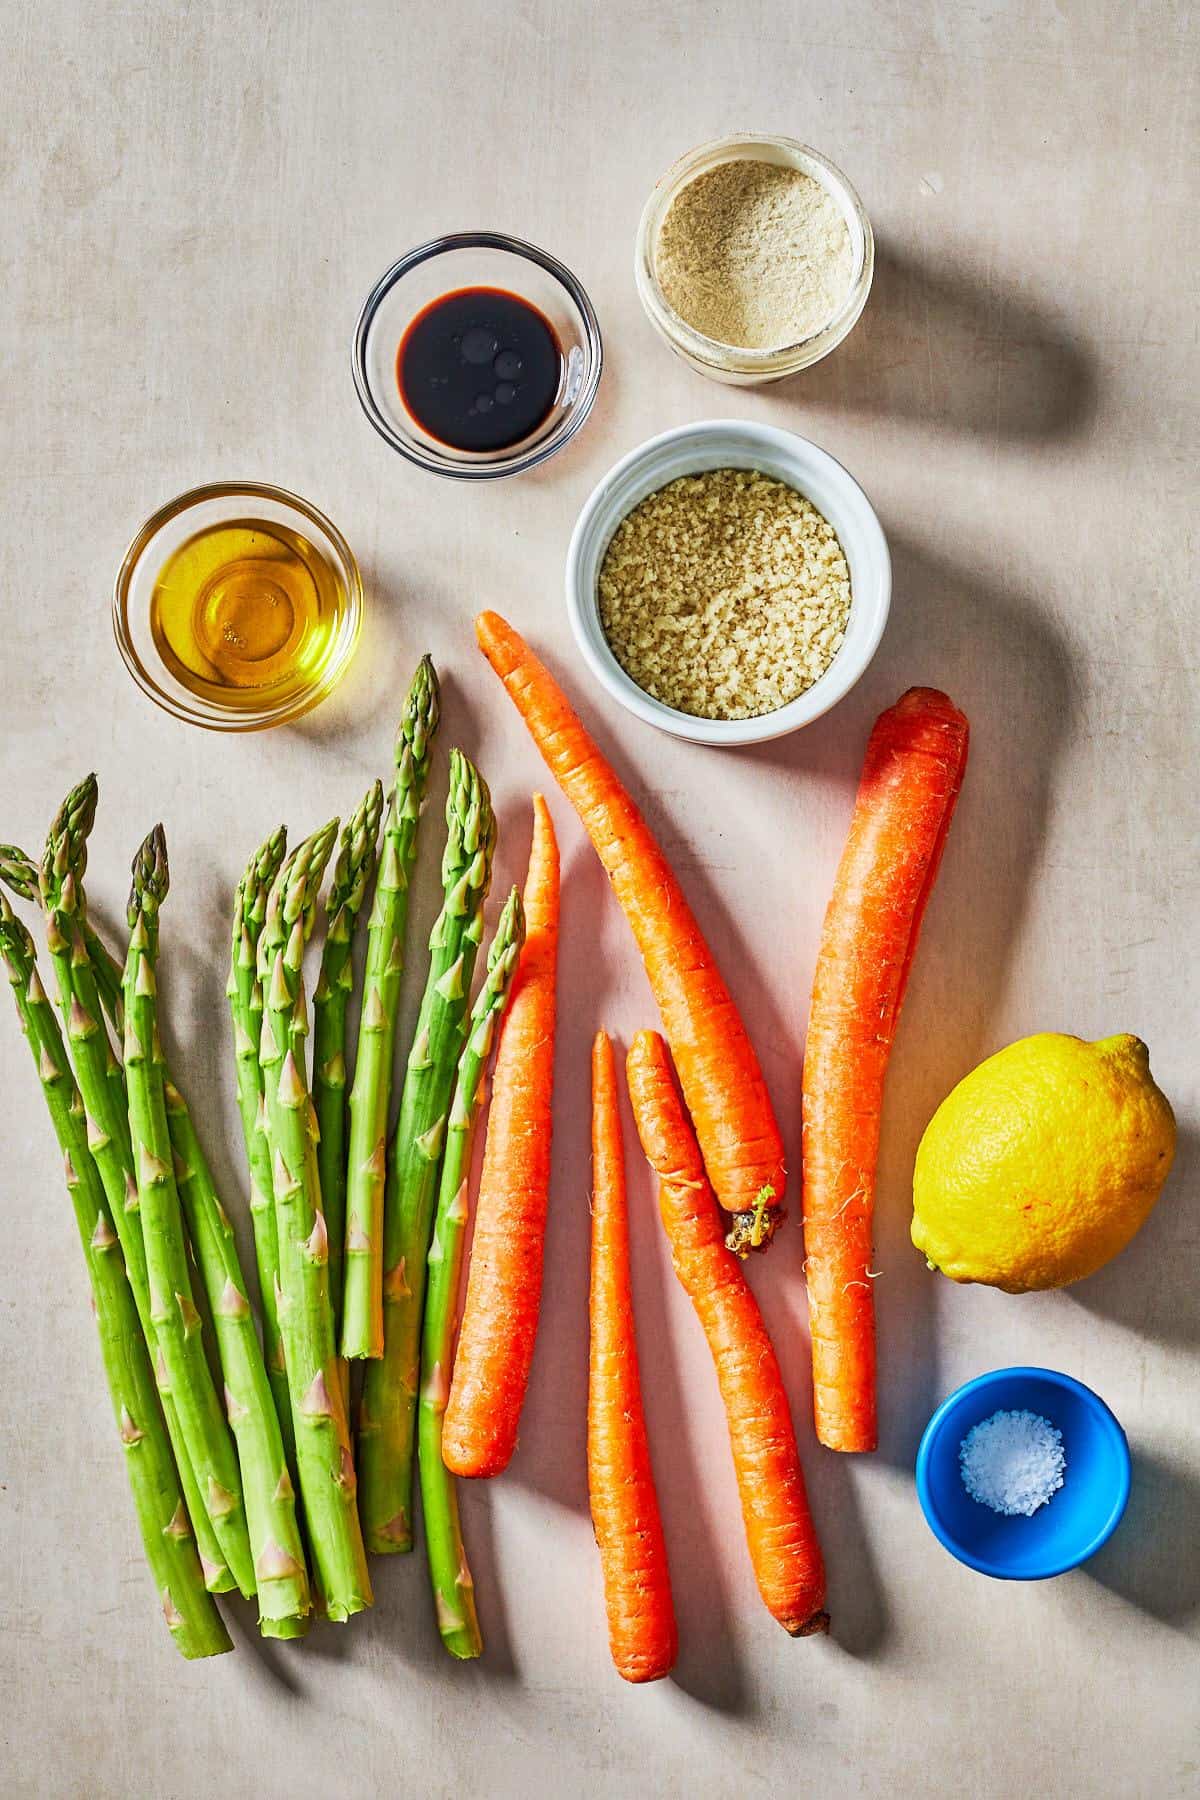 asparagus, carrots, lemon and other ingredients for the recipe